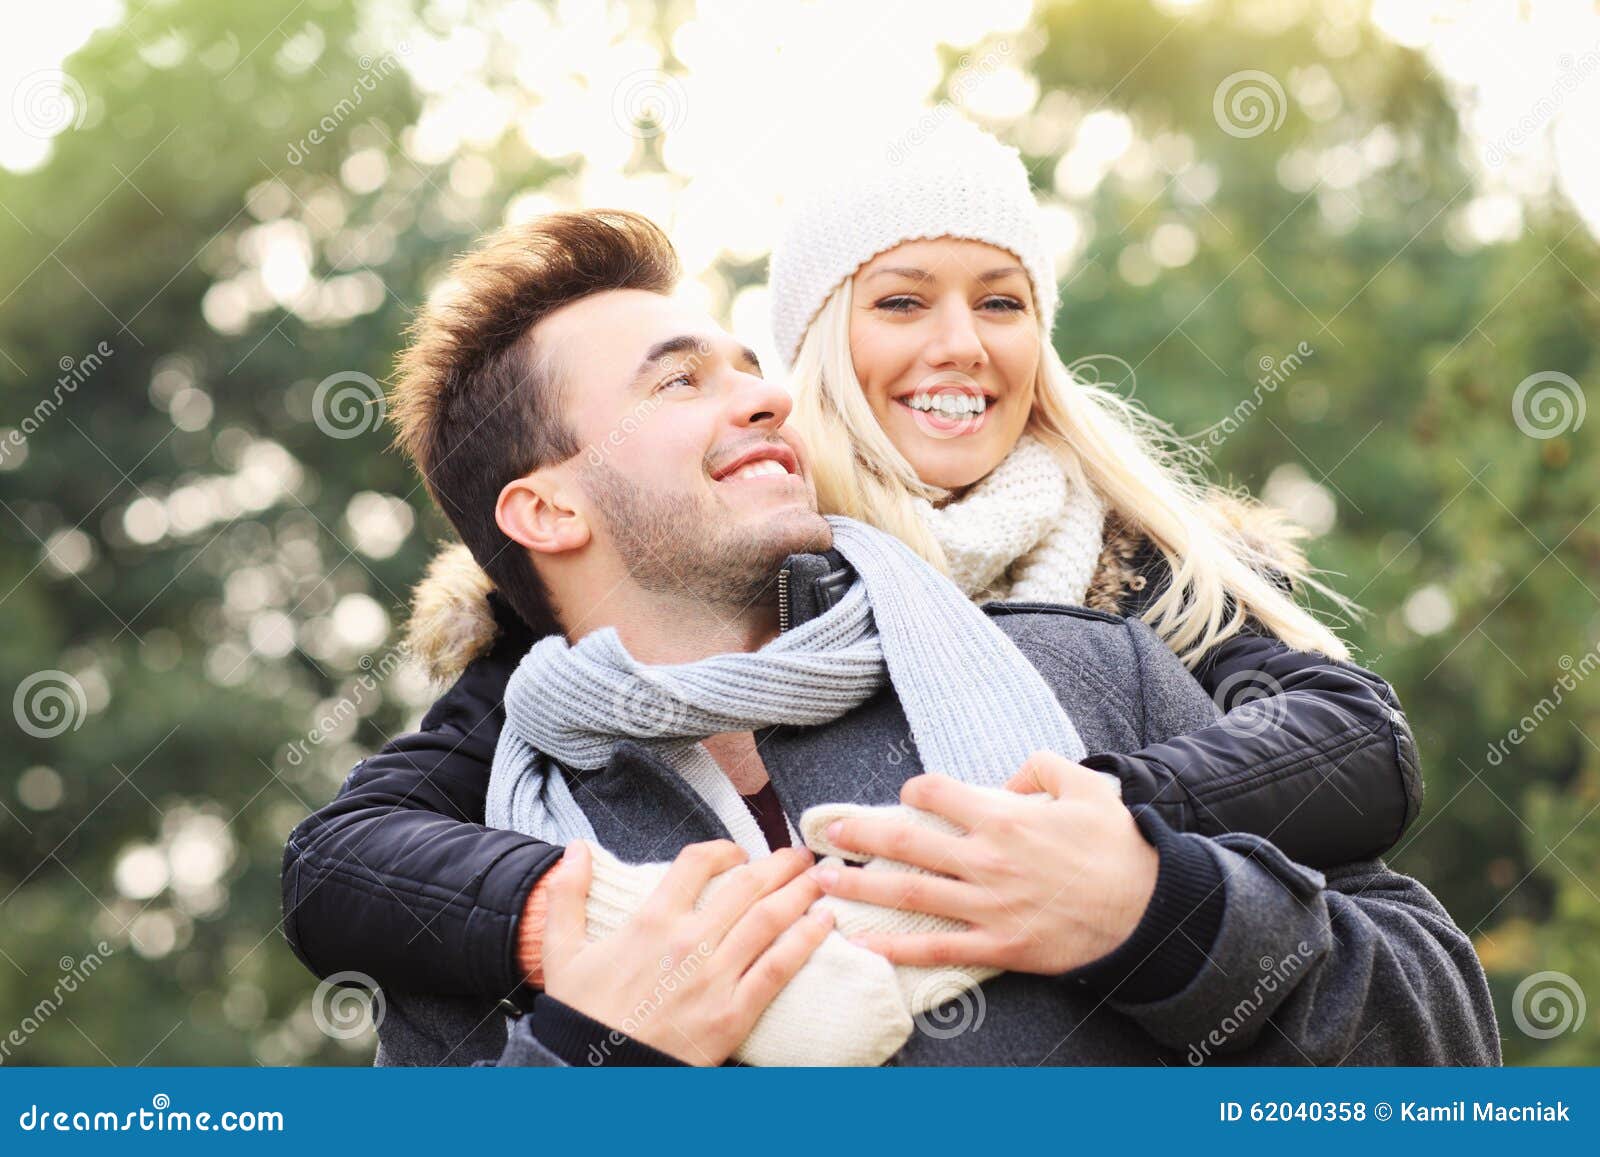 Happy Couple Having Fun On A Date In The Park Stock Photo Image Of